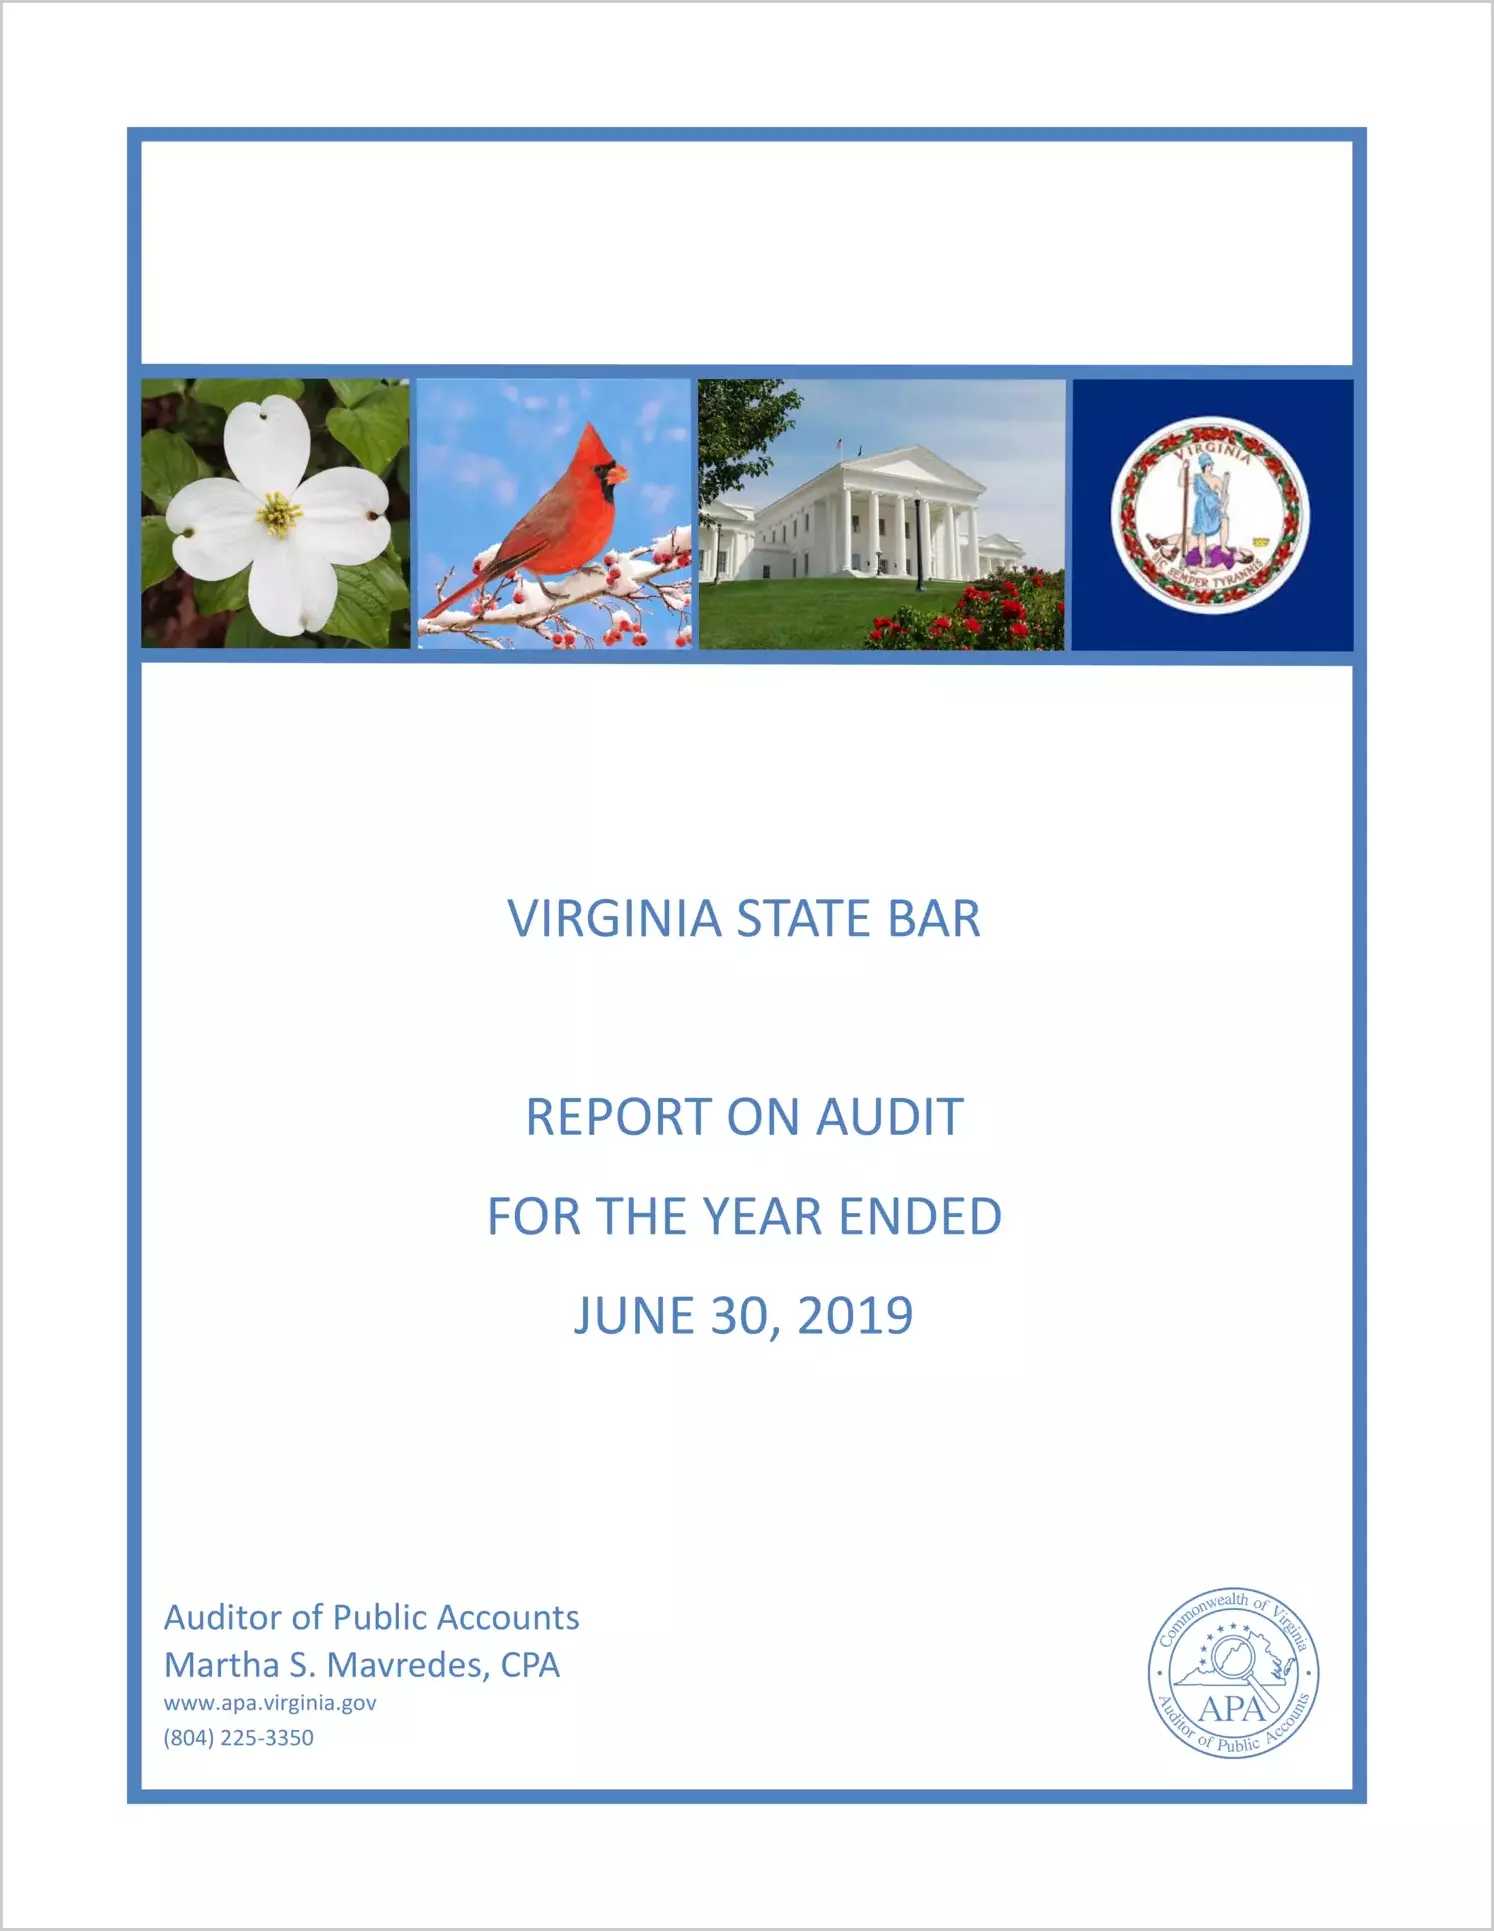 Virginia State Bar for the year ended June 30, 2019